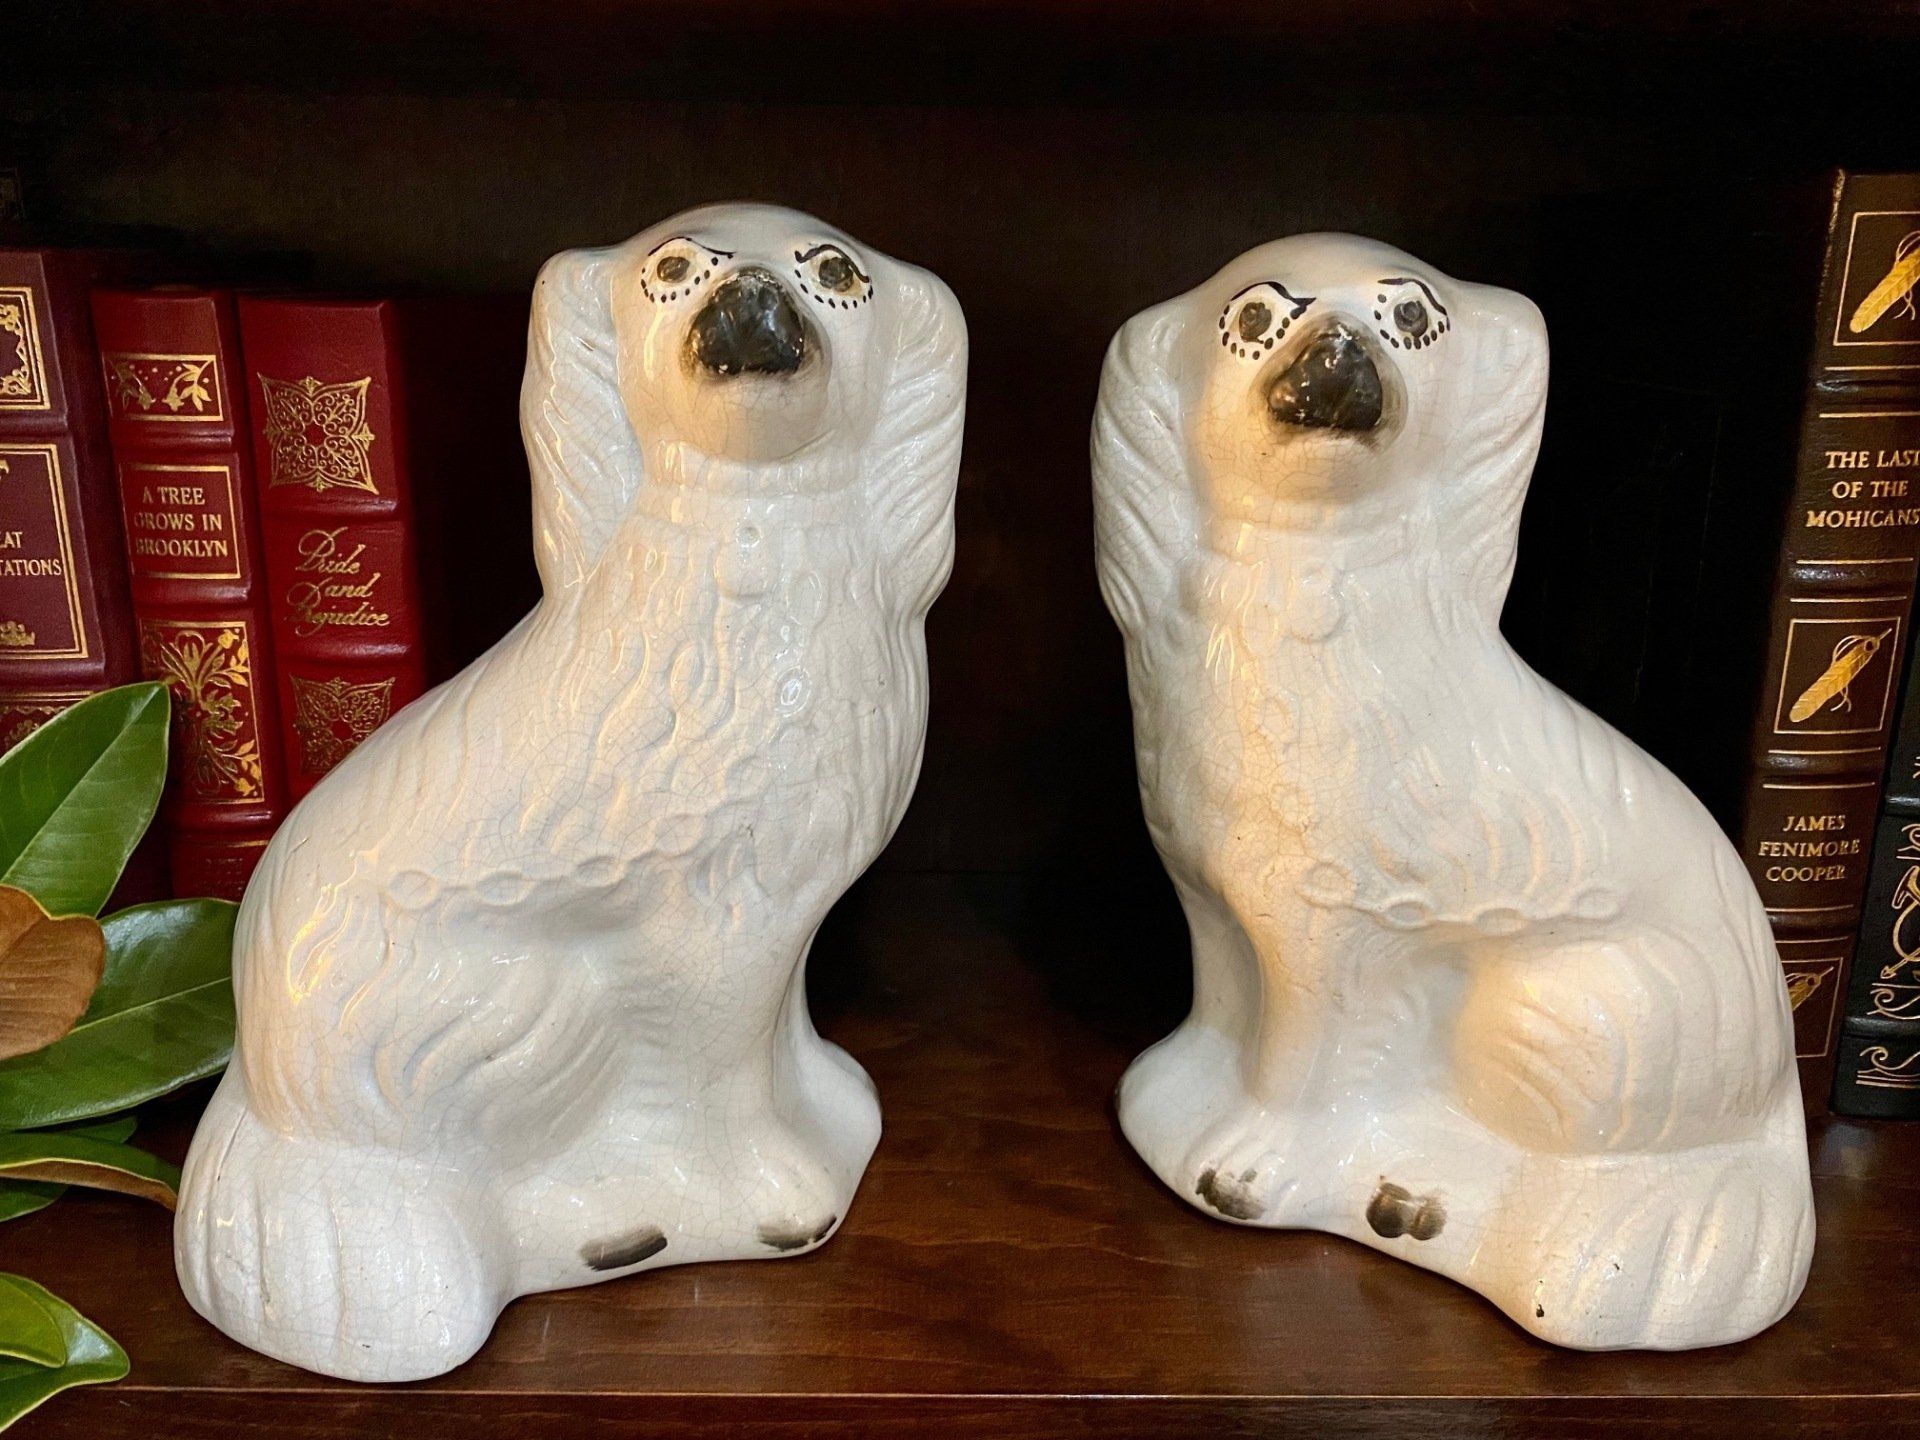 Antique Staffordshire Spaniel 1o inch pair.  Authentic dog figurines manufactured circa 1880 to 1890